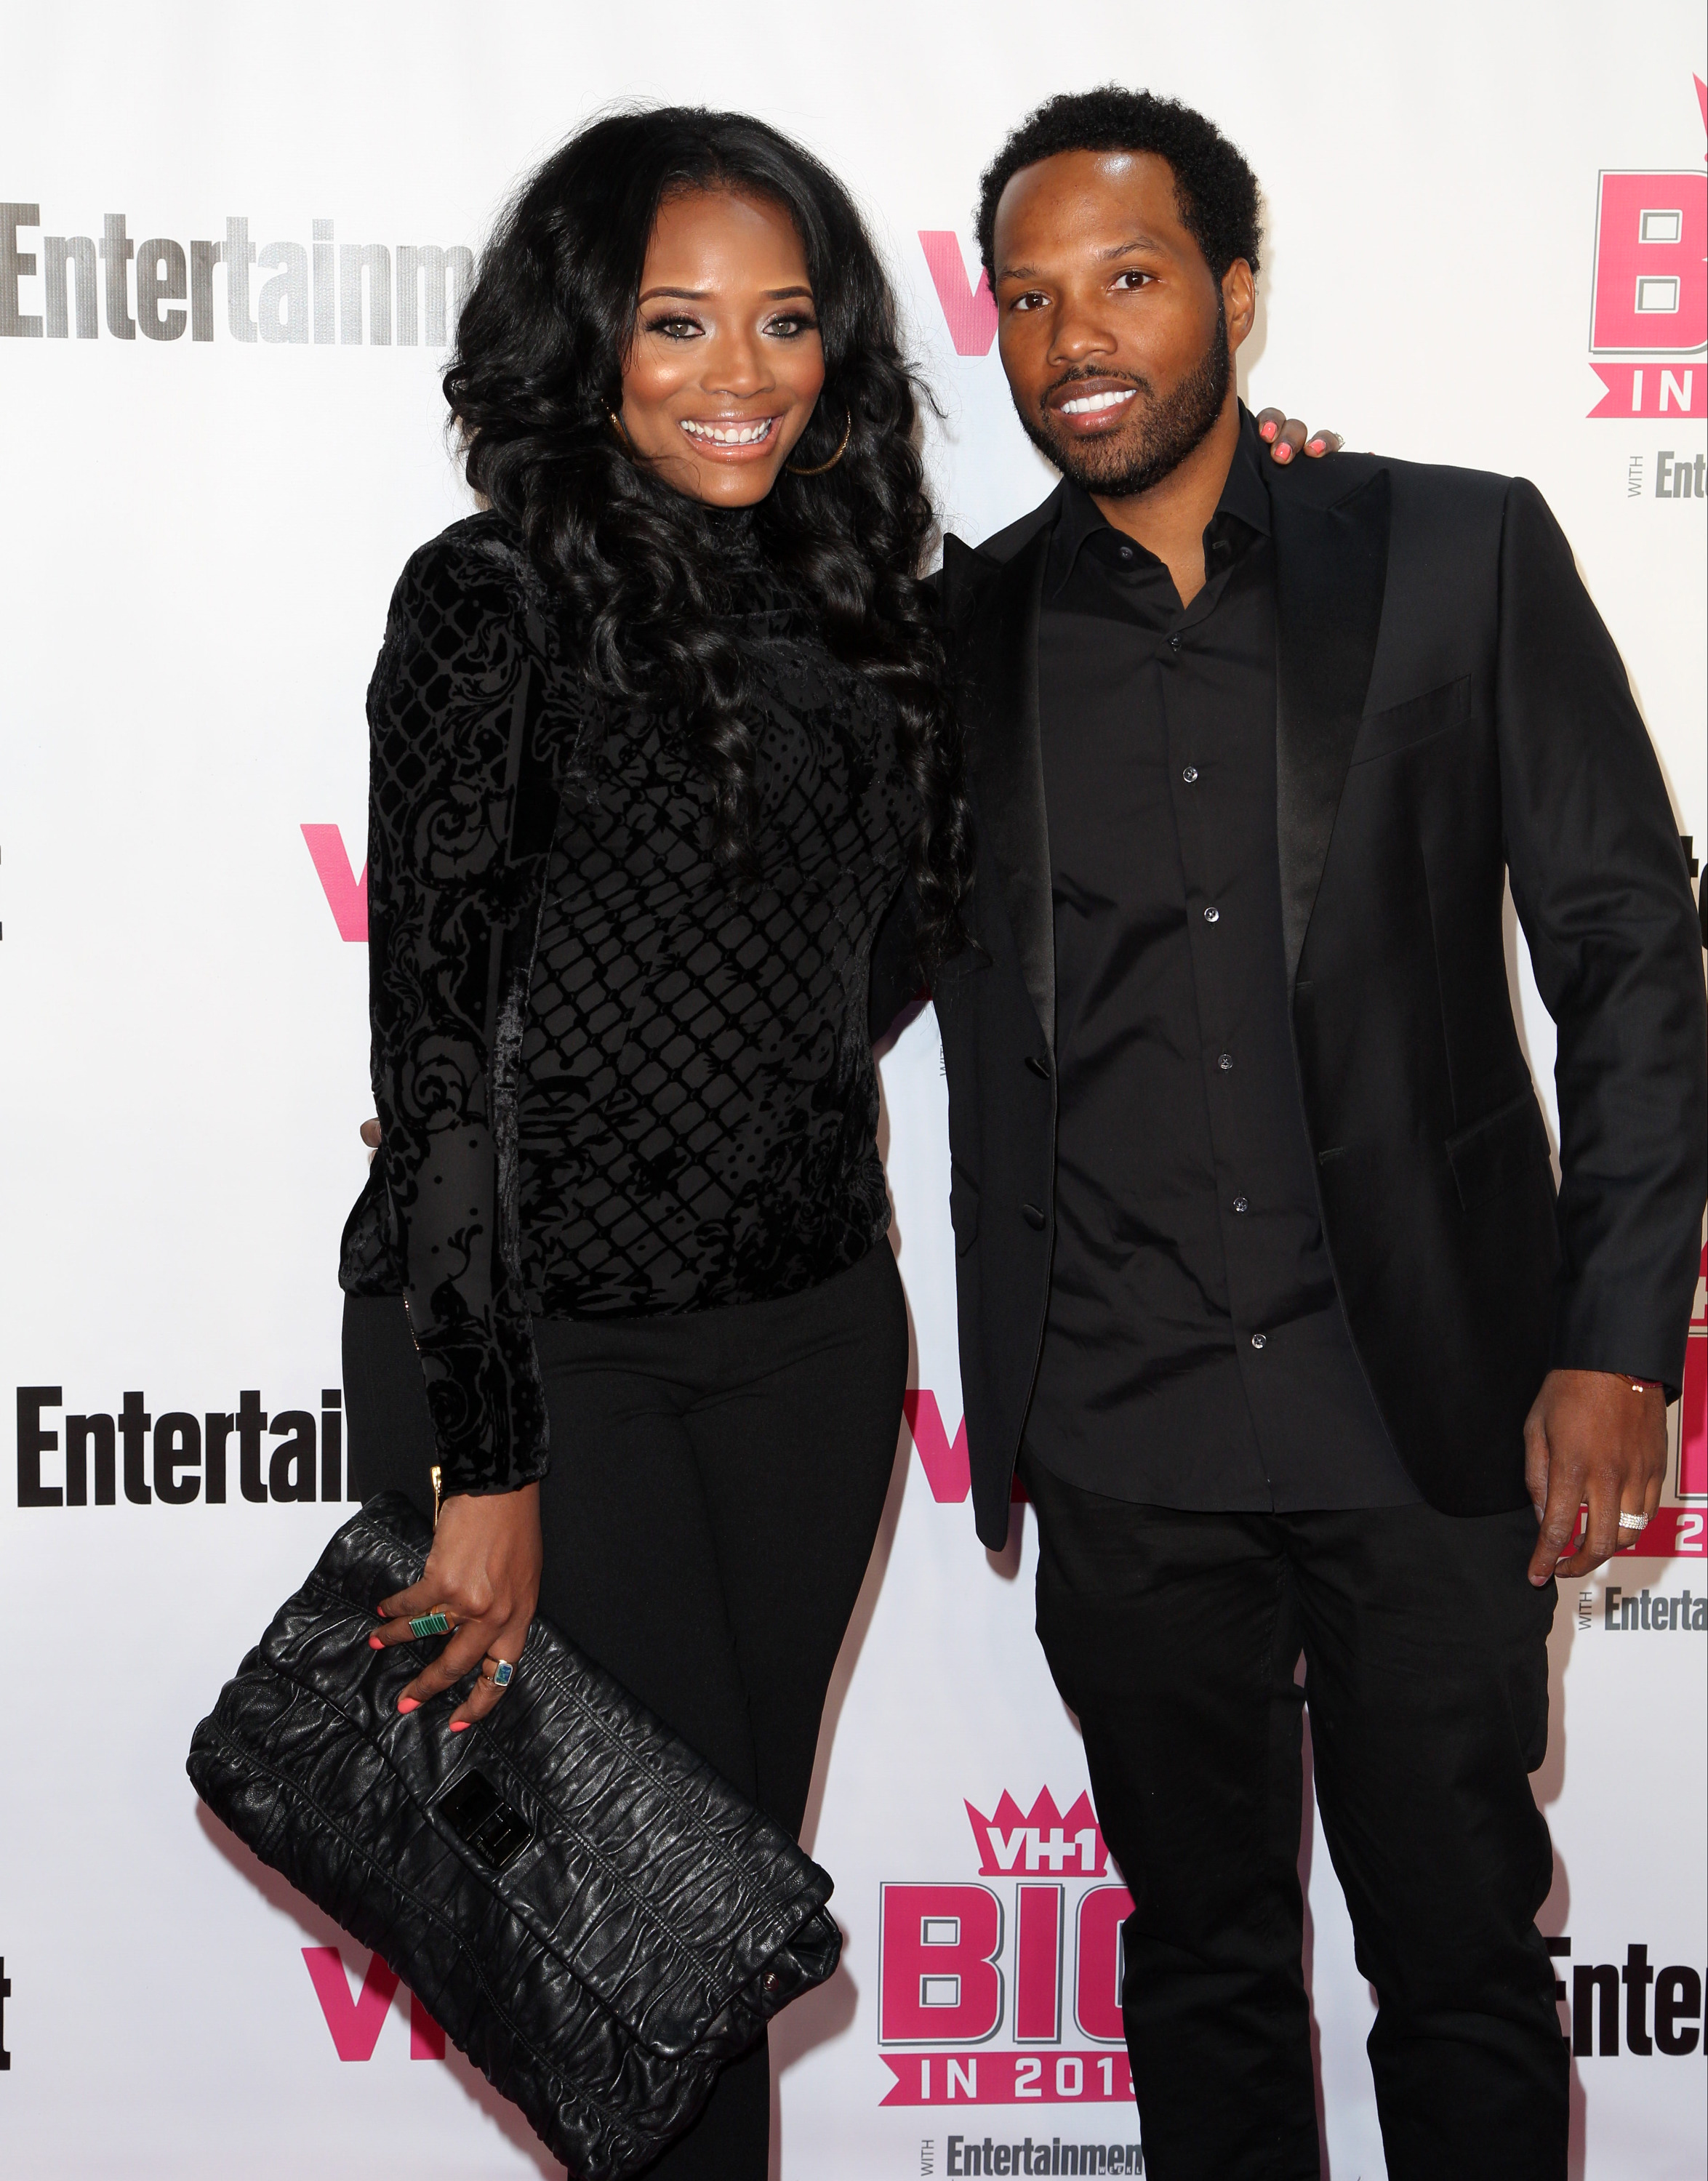 VH1 Big In 2015 With Entertainment Weekly Awards - Arrivals